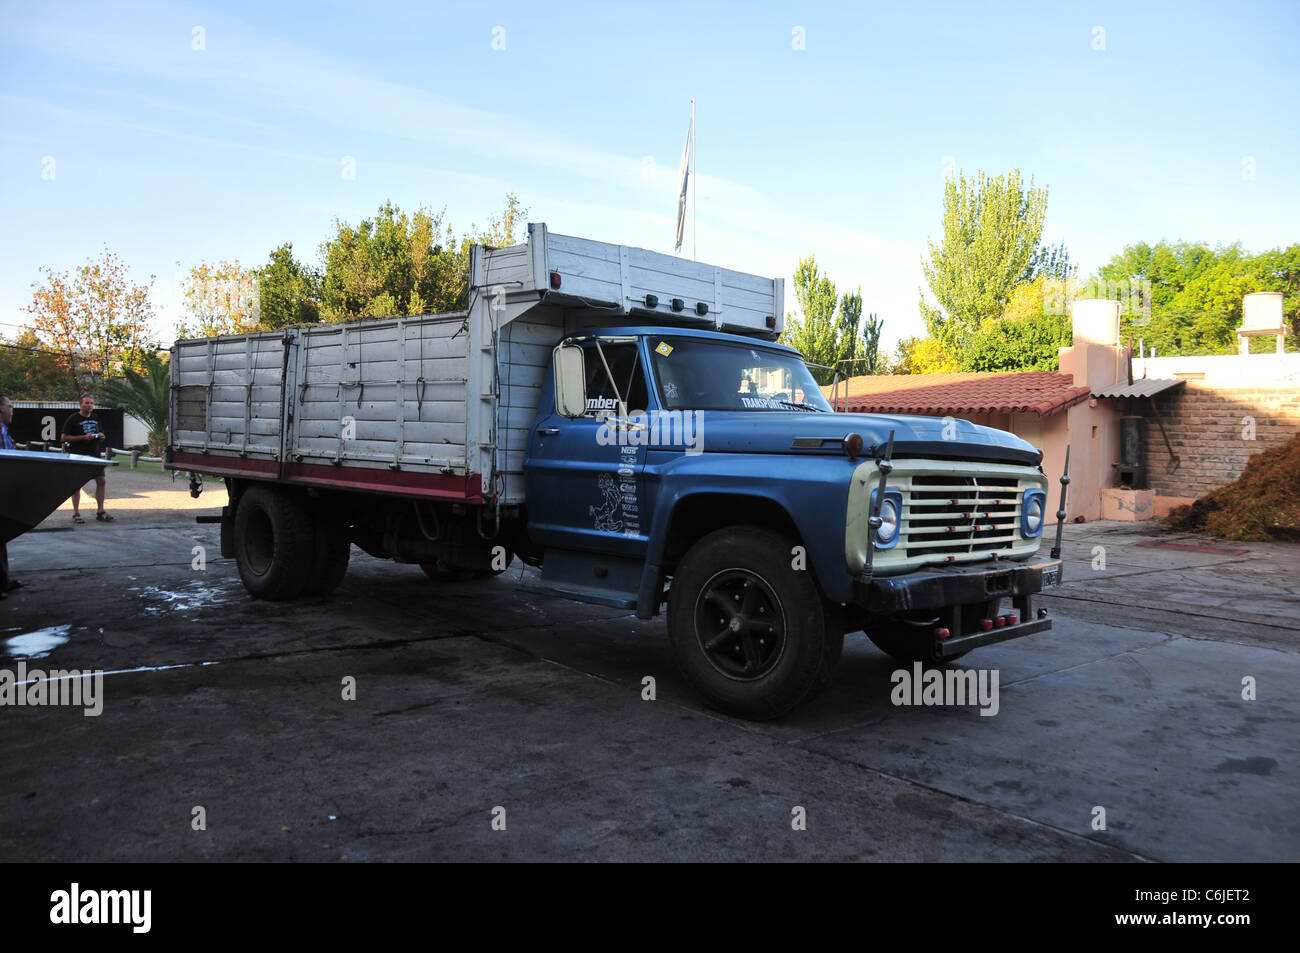 Grape-delivery lorry parked in a large yard, prior to tipping grapes for crushing, Carmine Granata Winery, Mendoza, Argentina Stock Photo